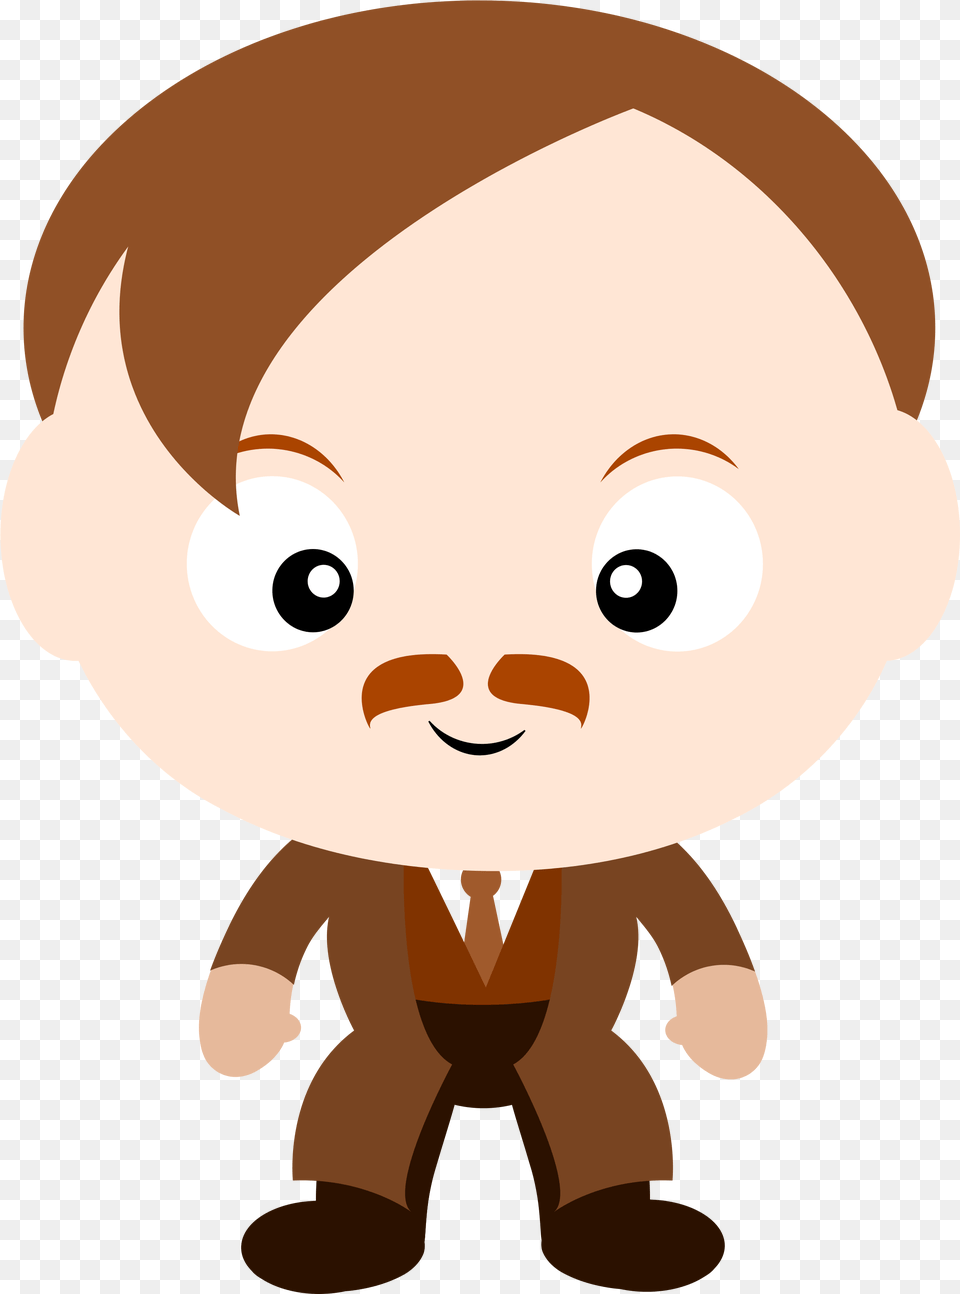 One Time Professor Remus Lupin Dark Arts Teacher And Harry Potter Cute Clipart, Plush, Toy, Baby, Person Png